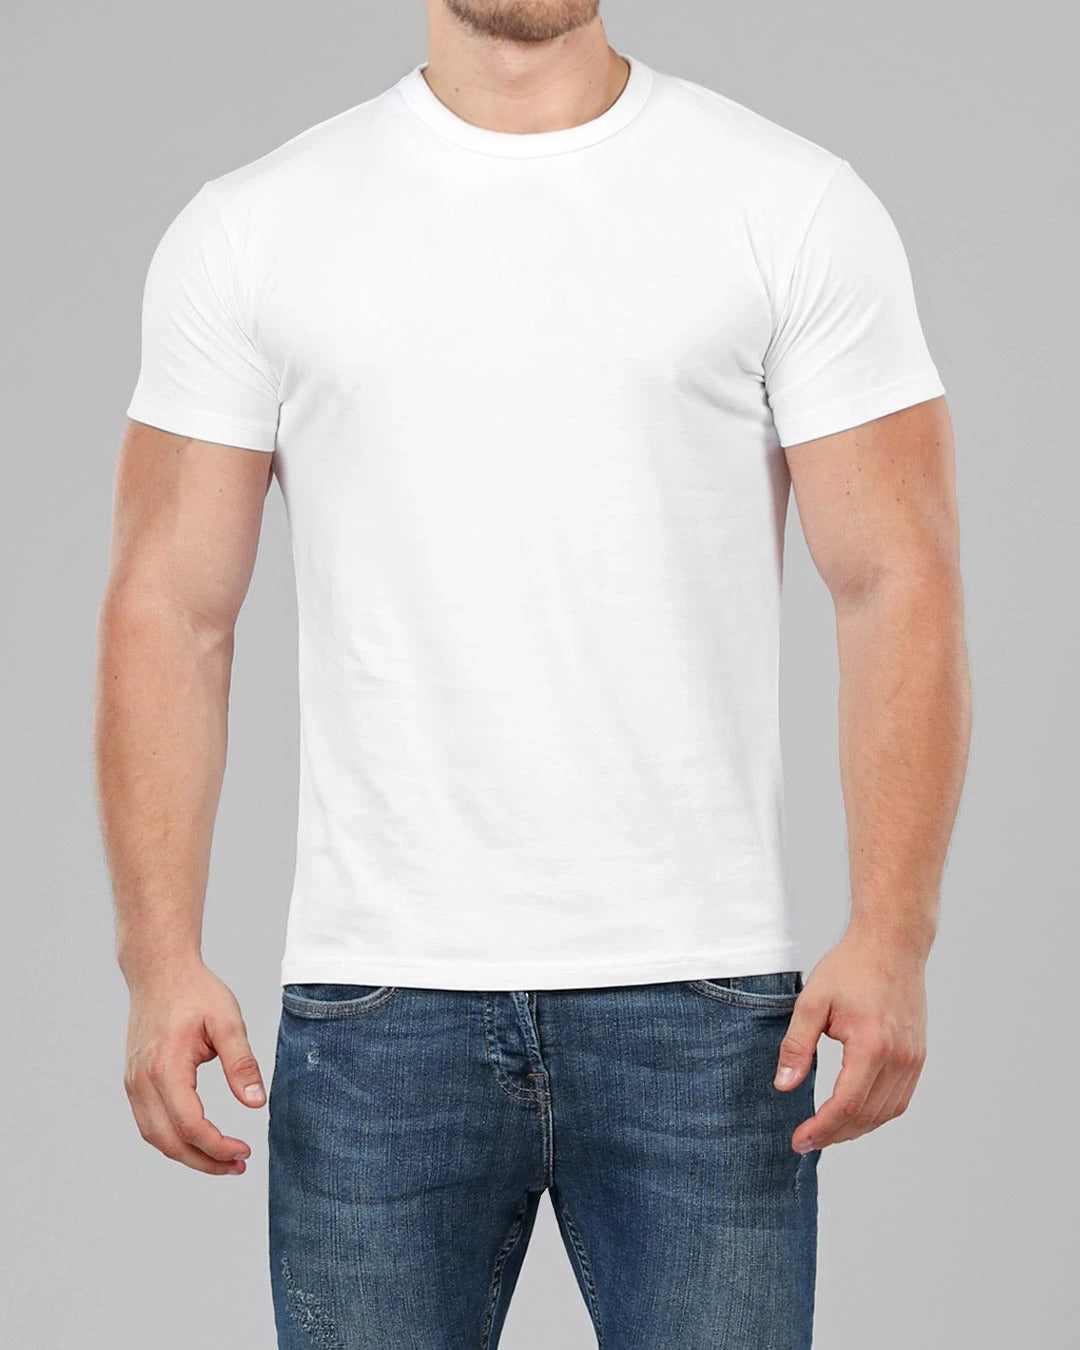 Men's White Crew Neck Fitted Plain T-Shirt Muscle Fit Basics